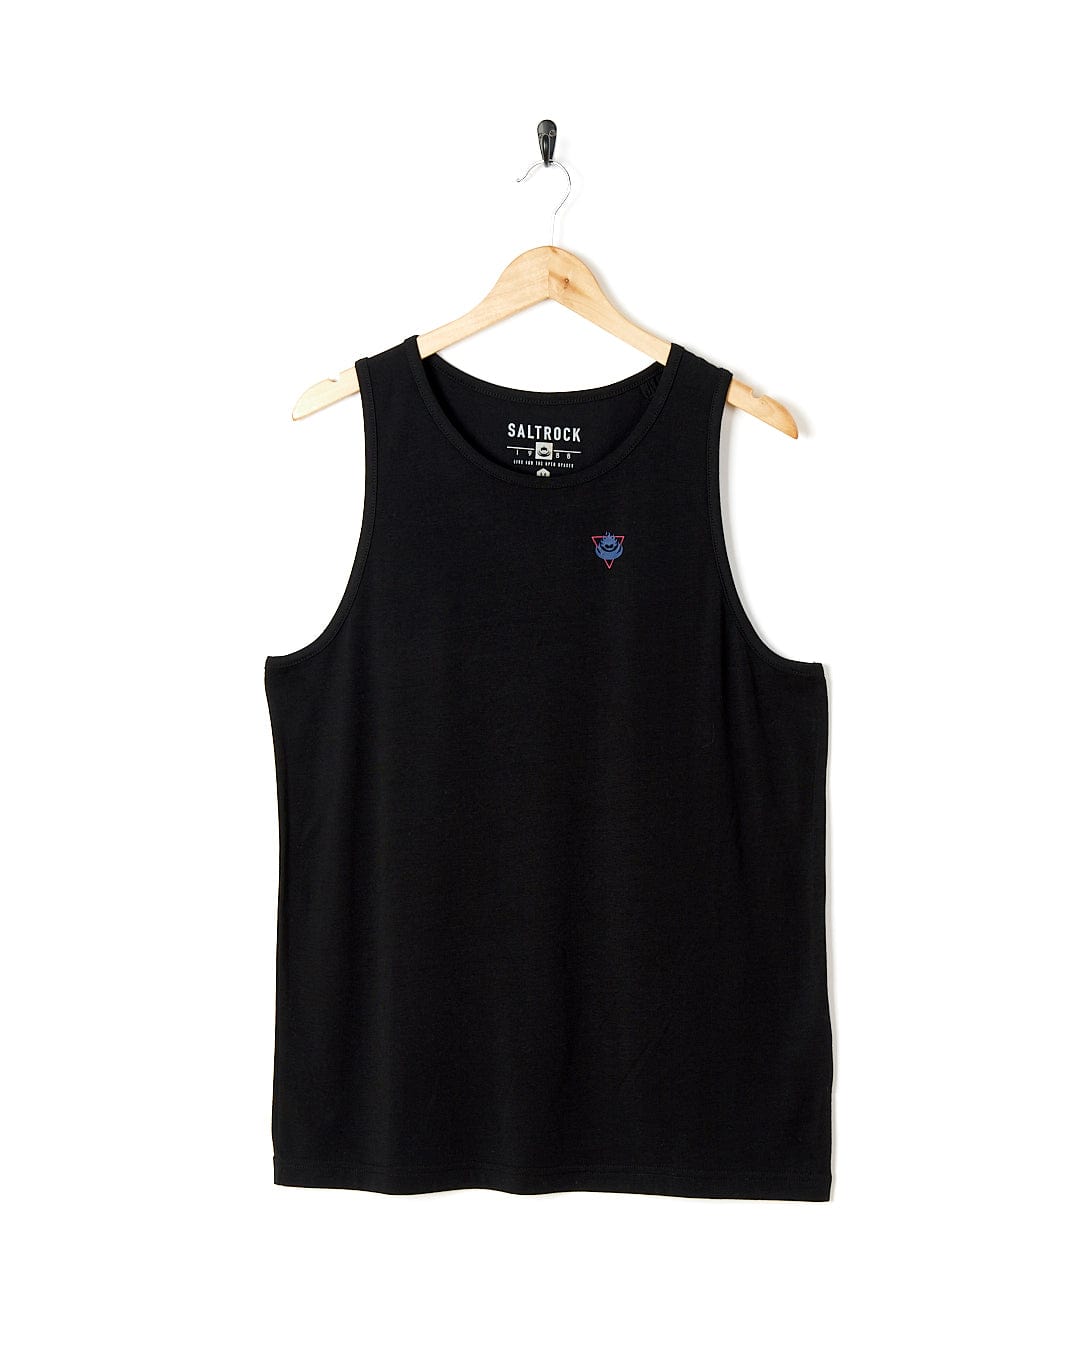 A Flame Tri - Mens Recycled Vest - Black with a heart on it. (Brand: Saltrock)